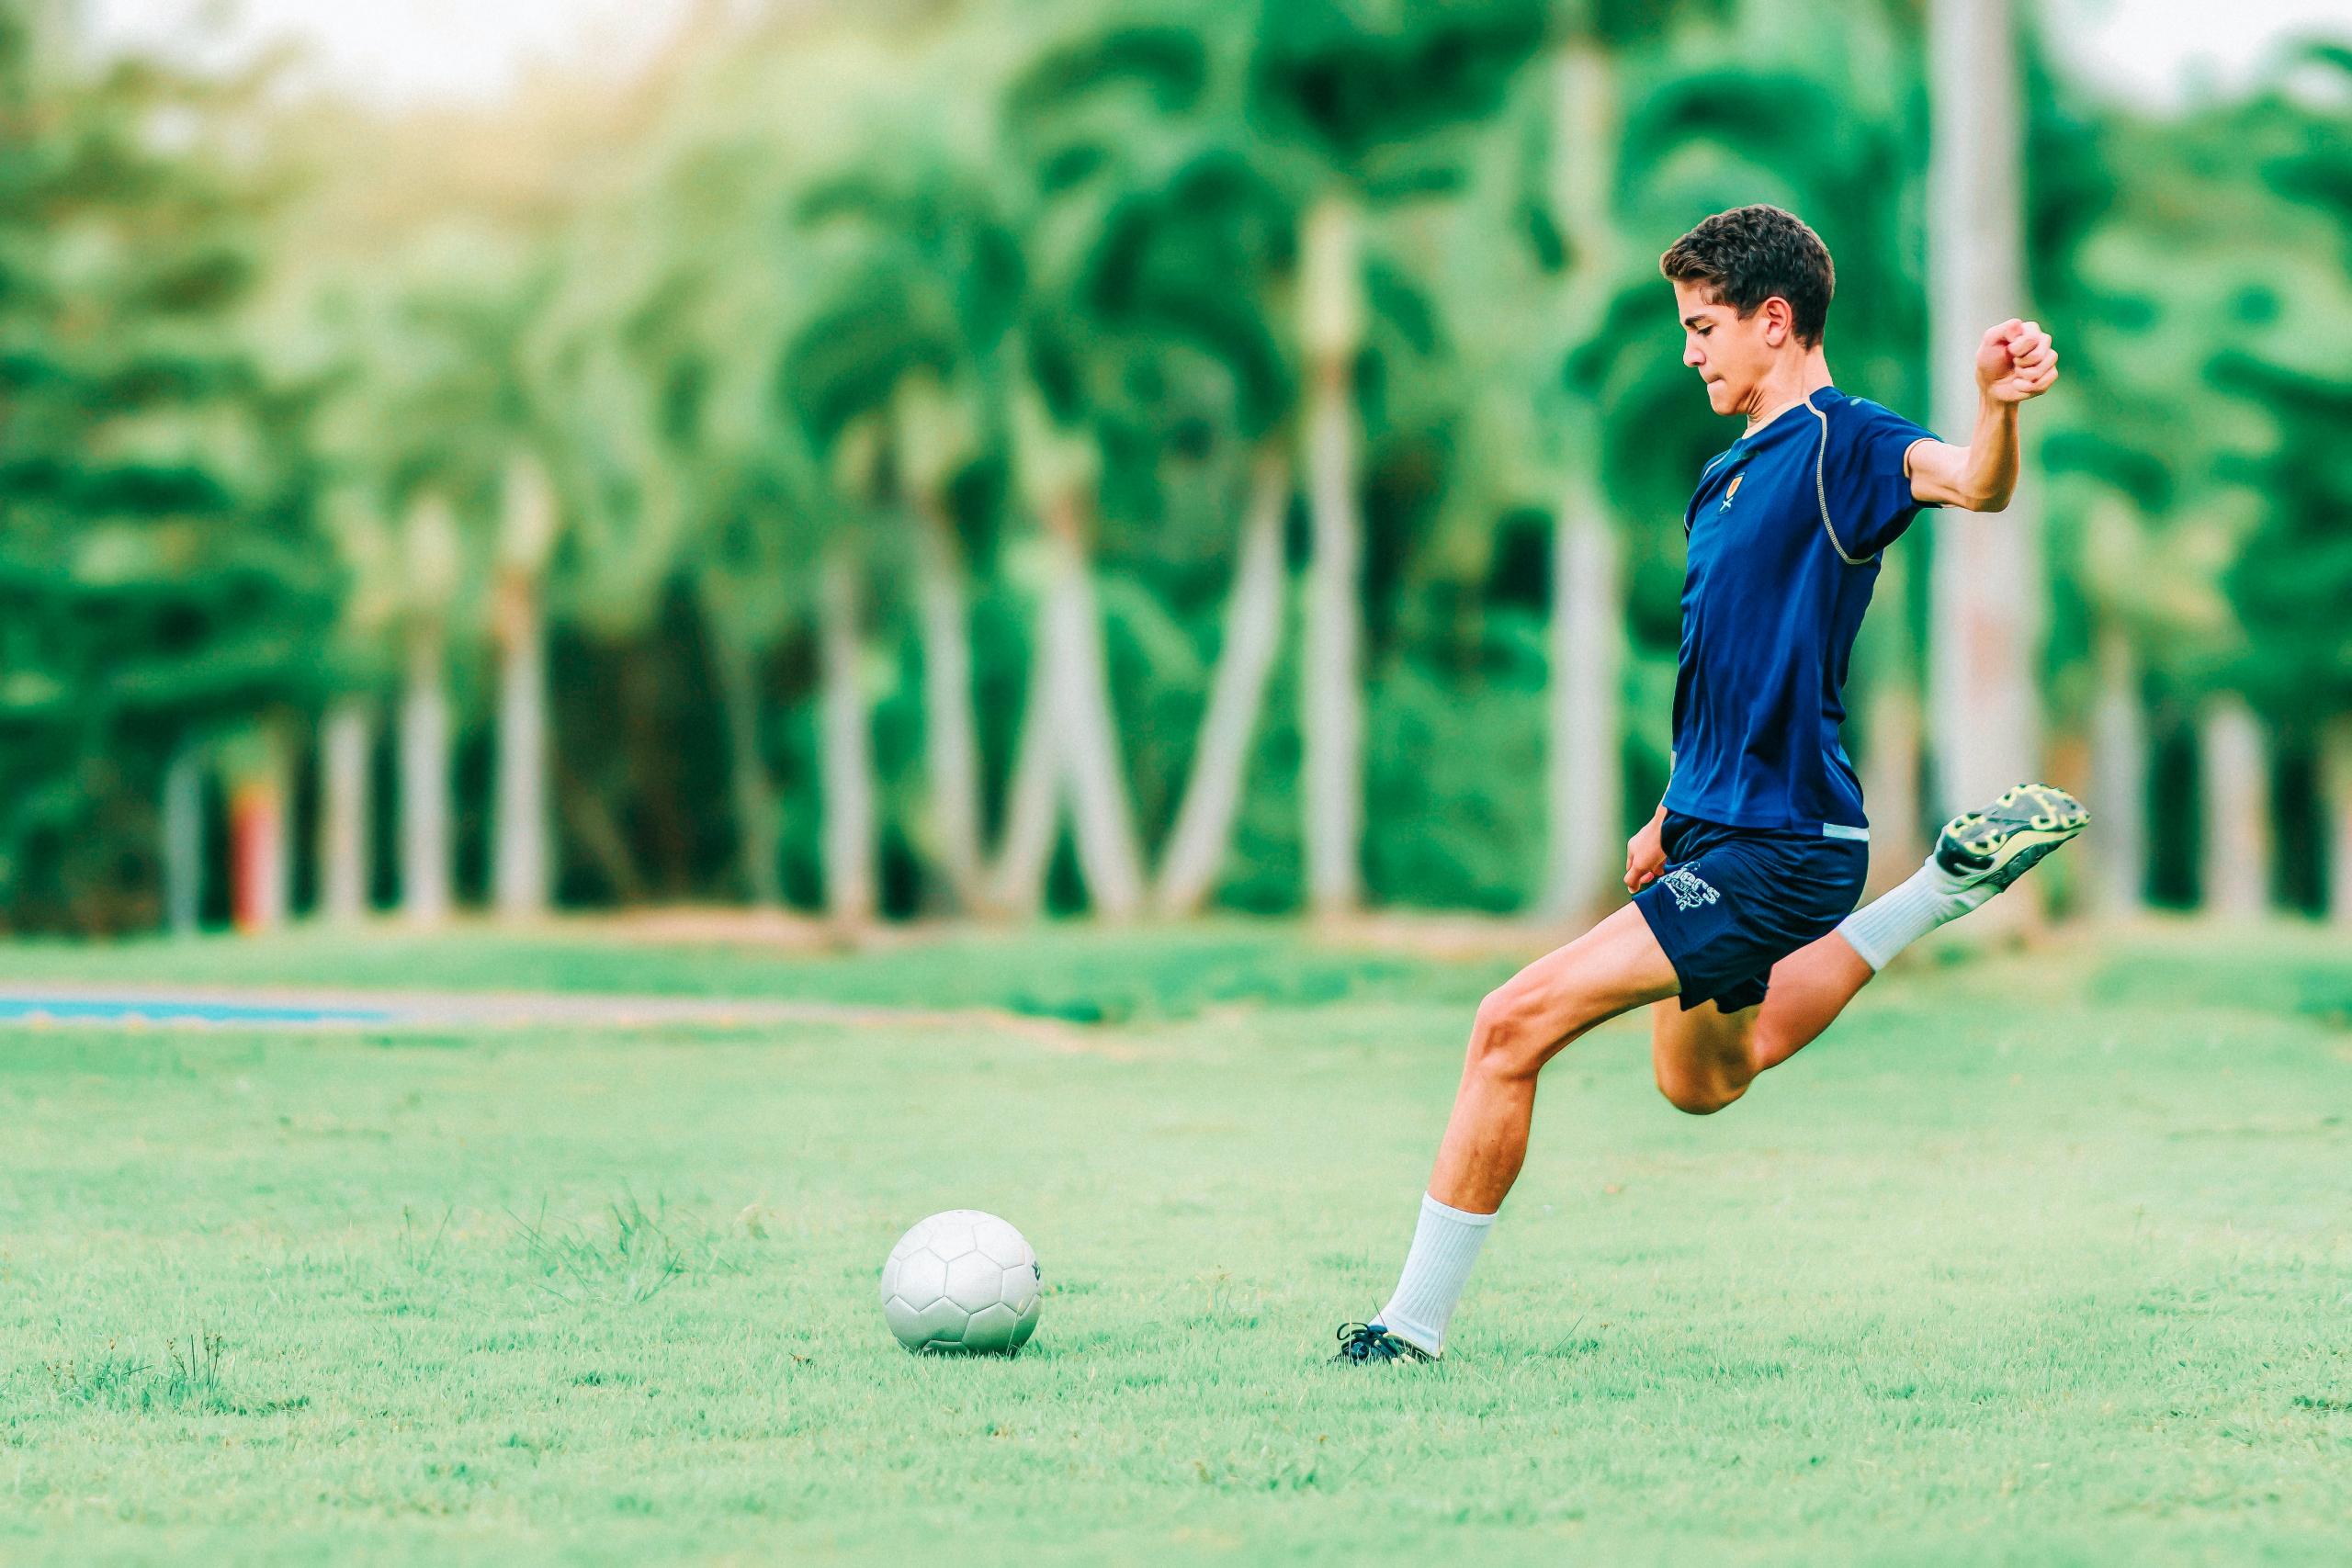 Choose the Best Option for Hiring a Qualified Private Soccer Coach for Your Kids